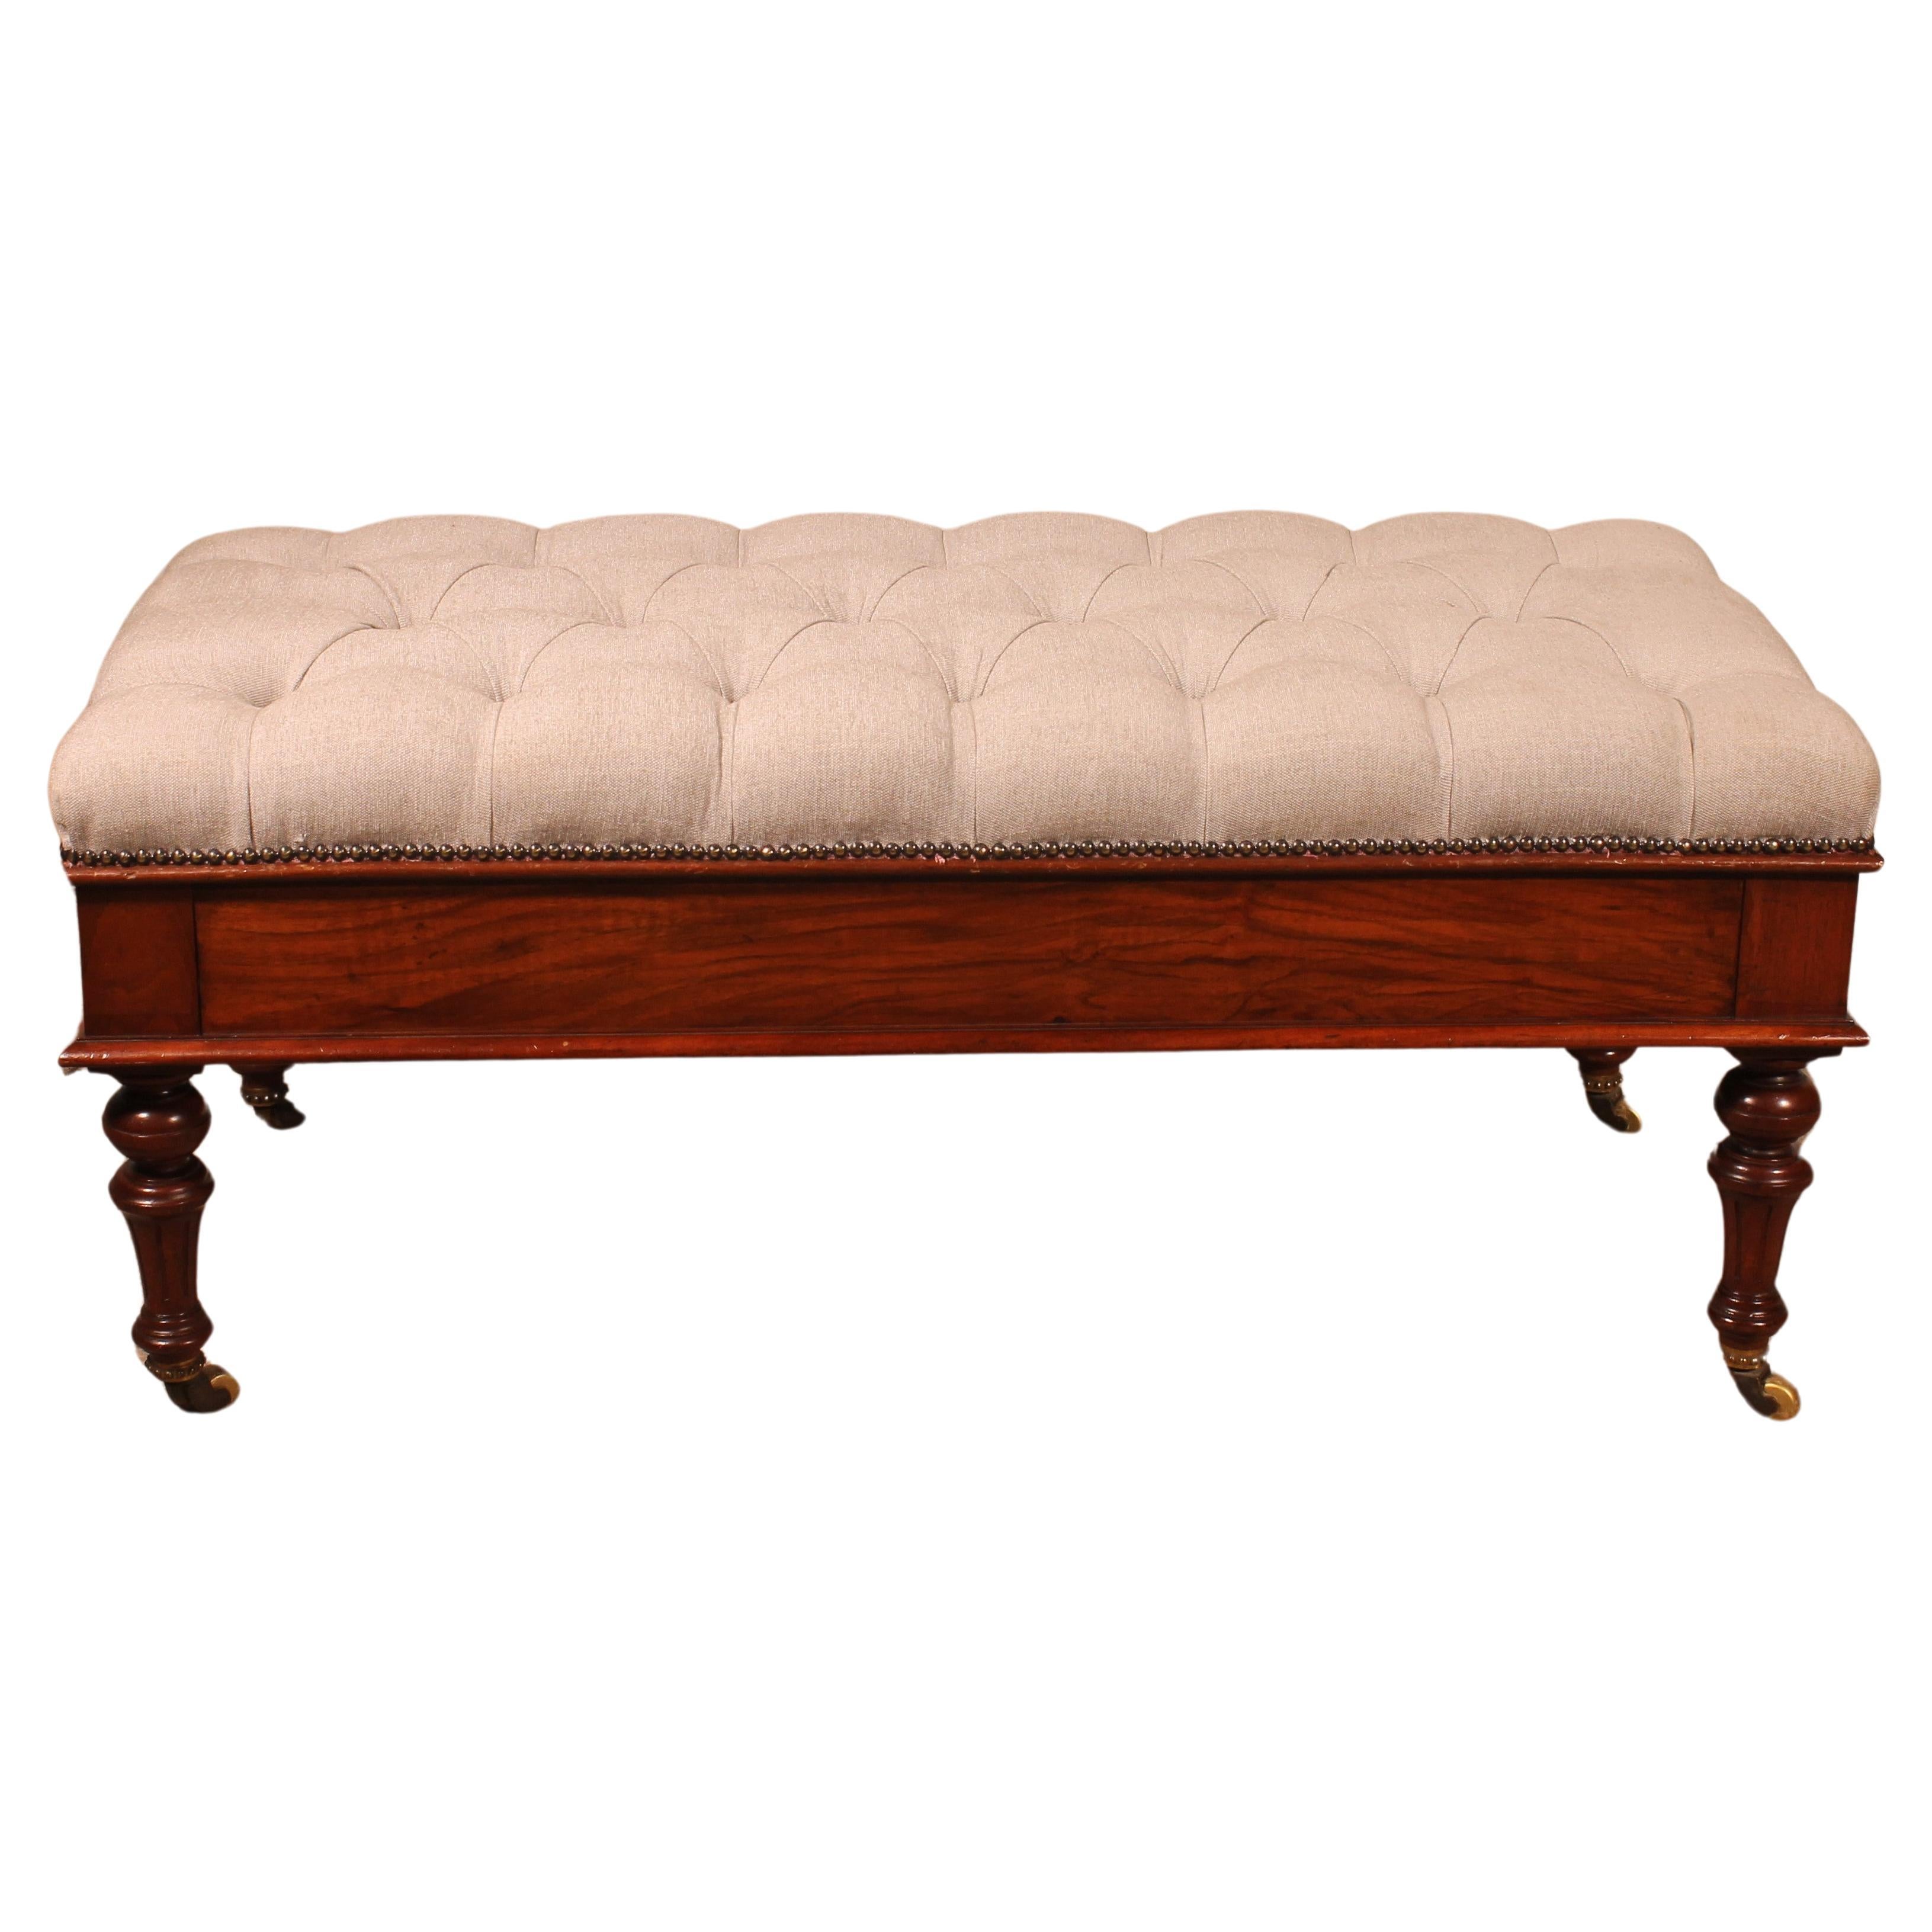 19th Century Walnut Bench Covered With A Chesterfield Style Seating